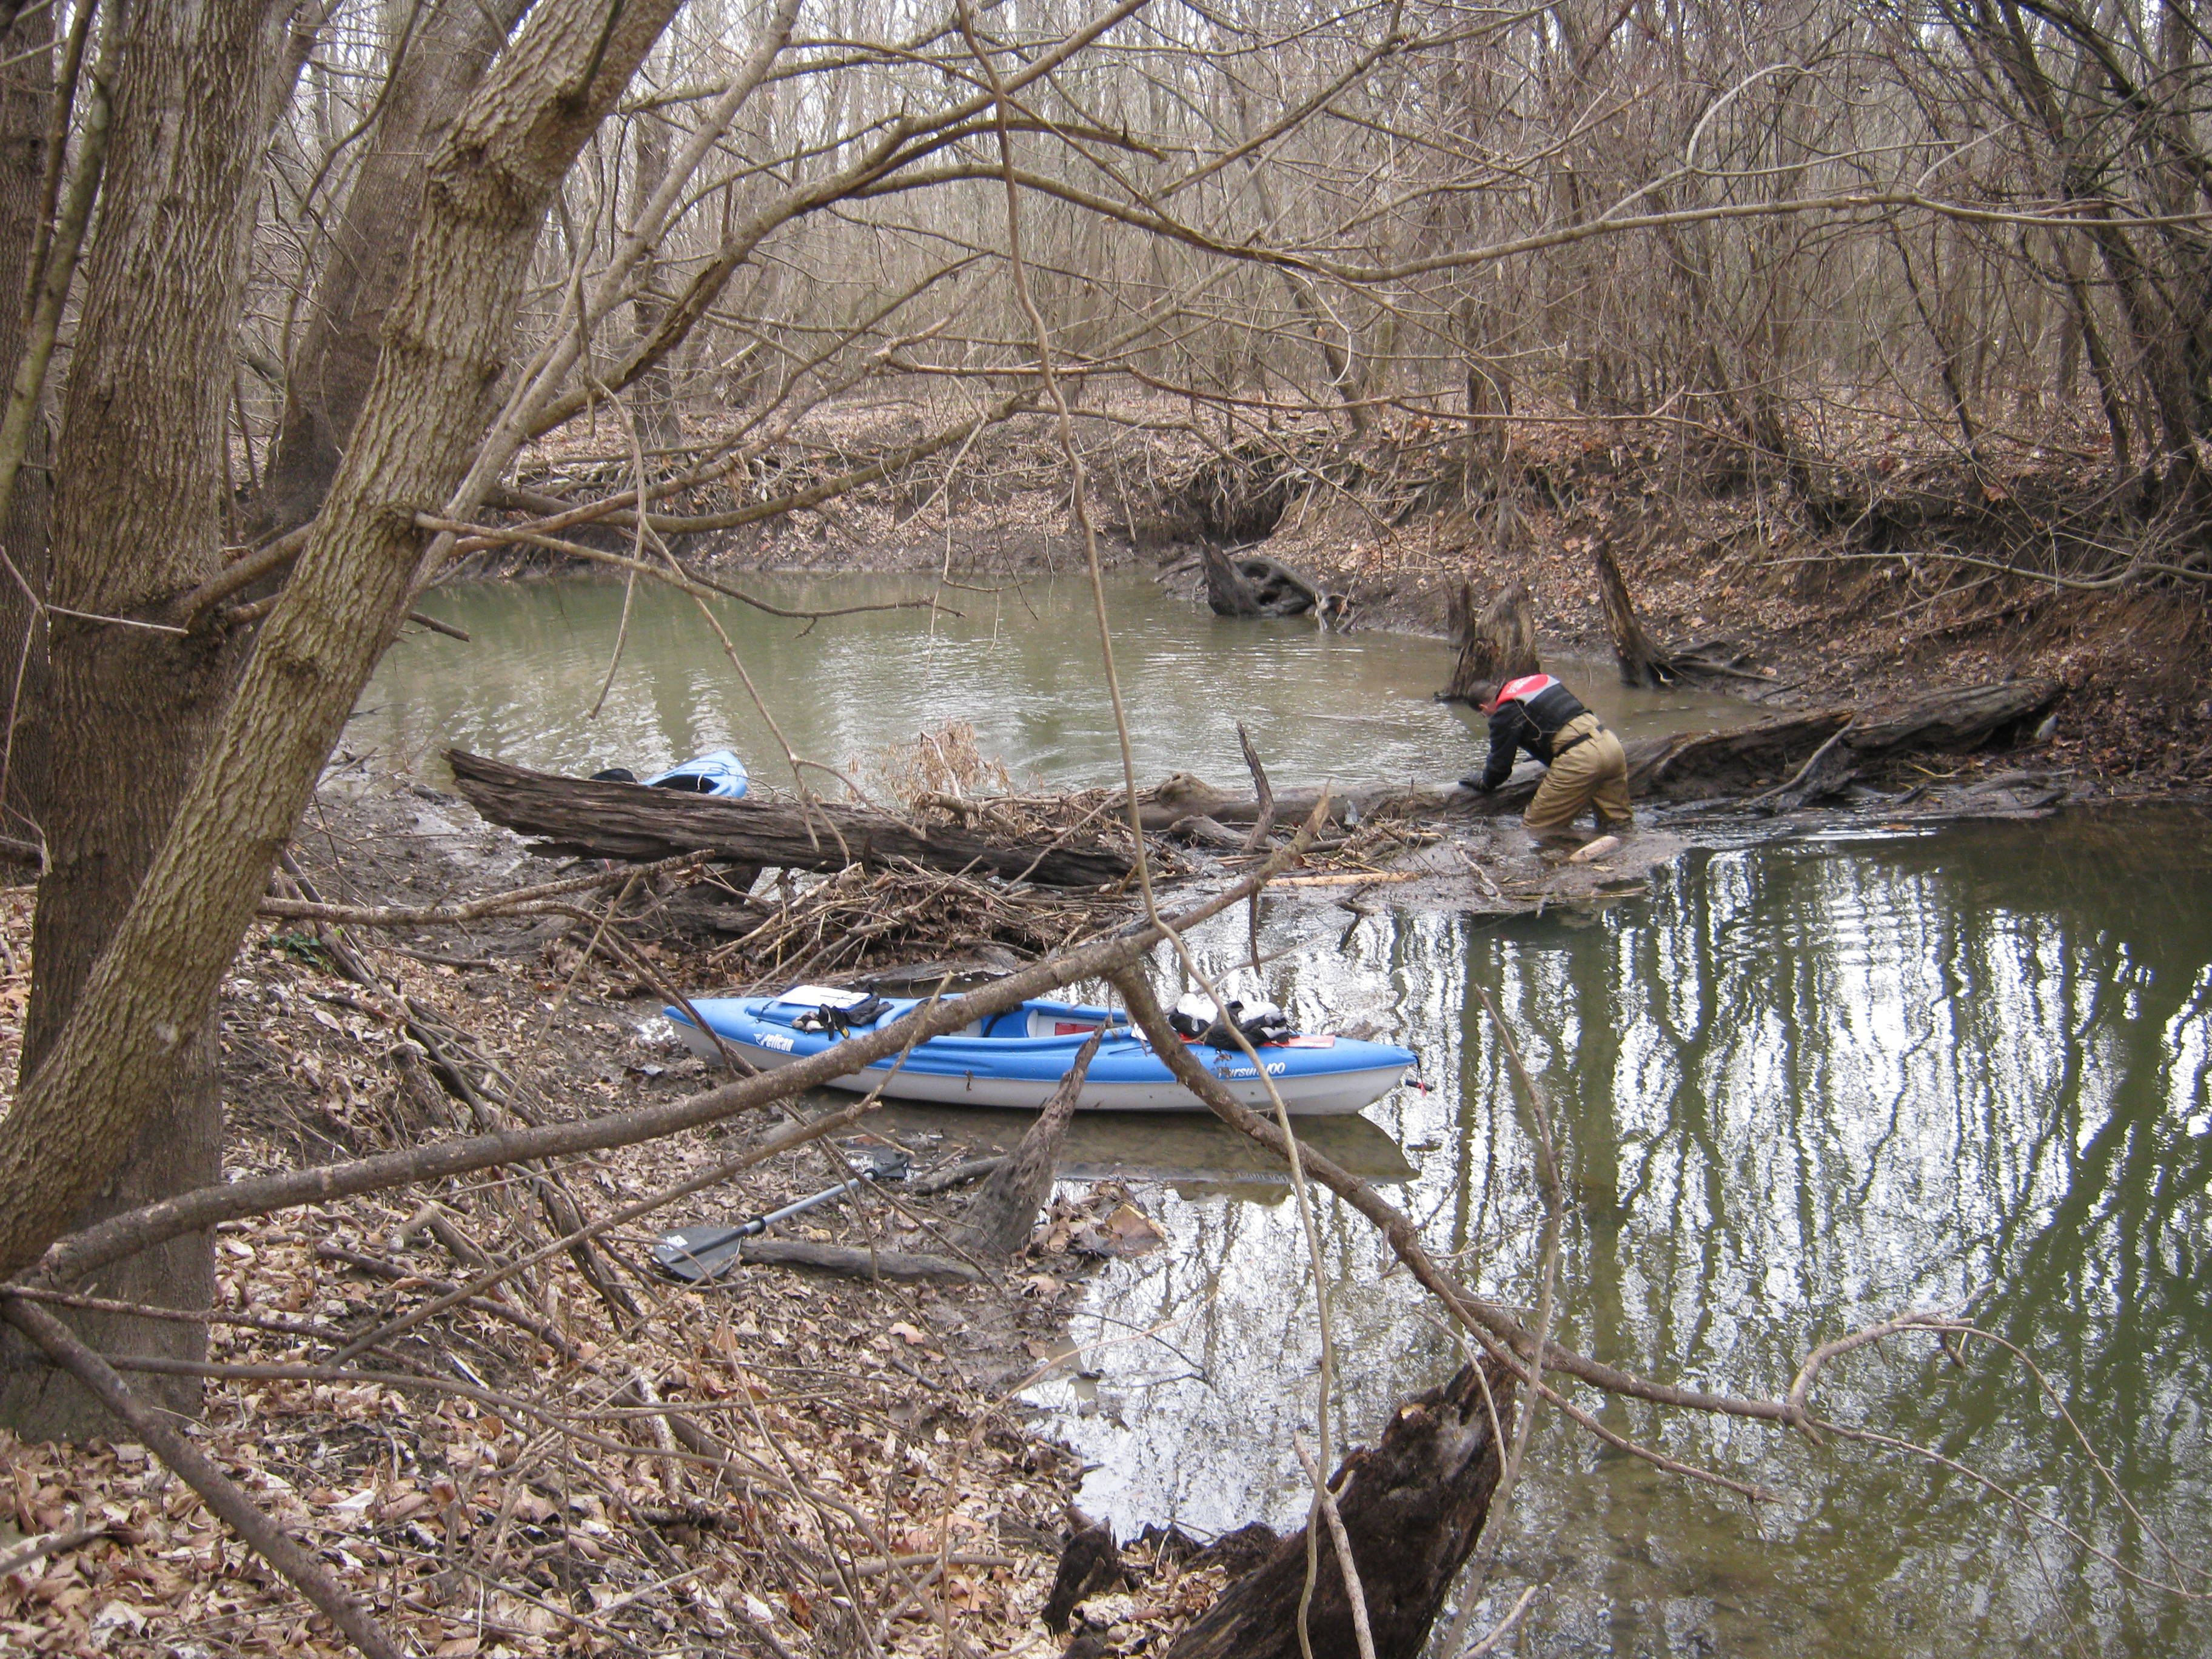 Scientist in knee deep water in front of a log fallen across the stream; canoe in the foreground